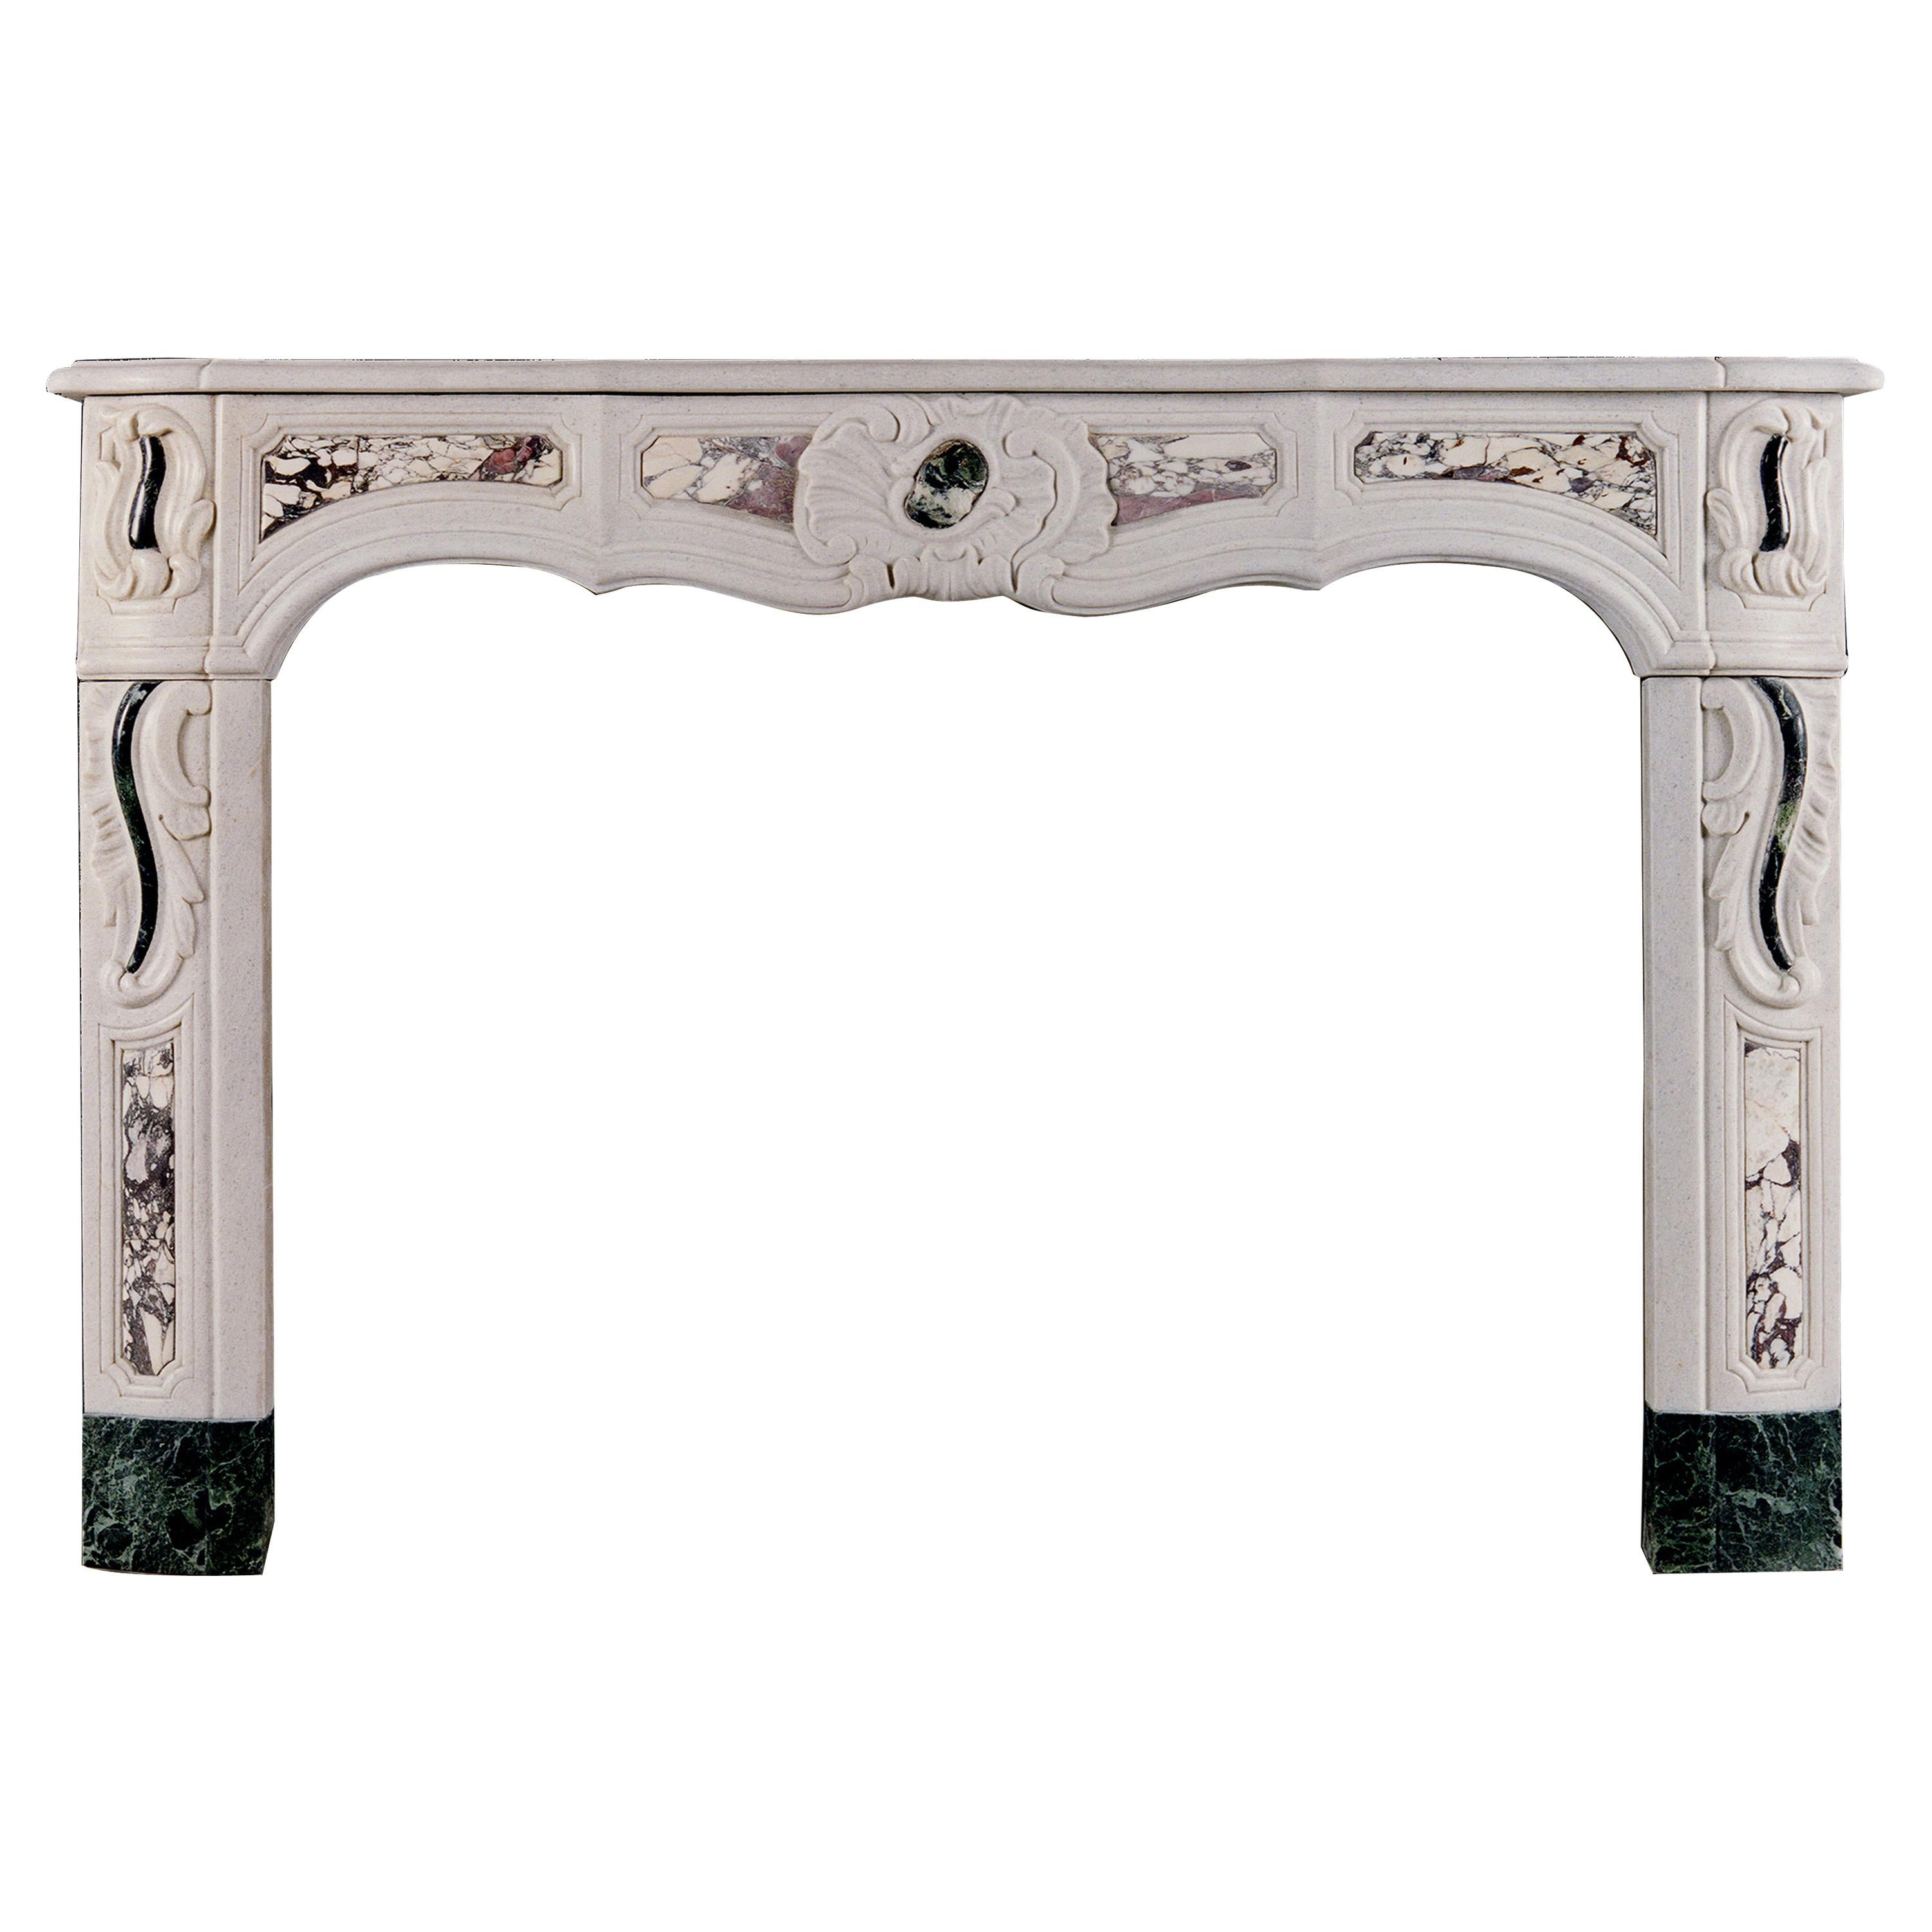 An Early 19th Century French Provençale White Marble Fireplace For Sale